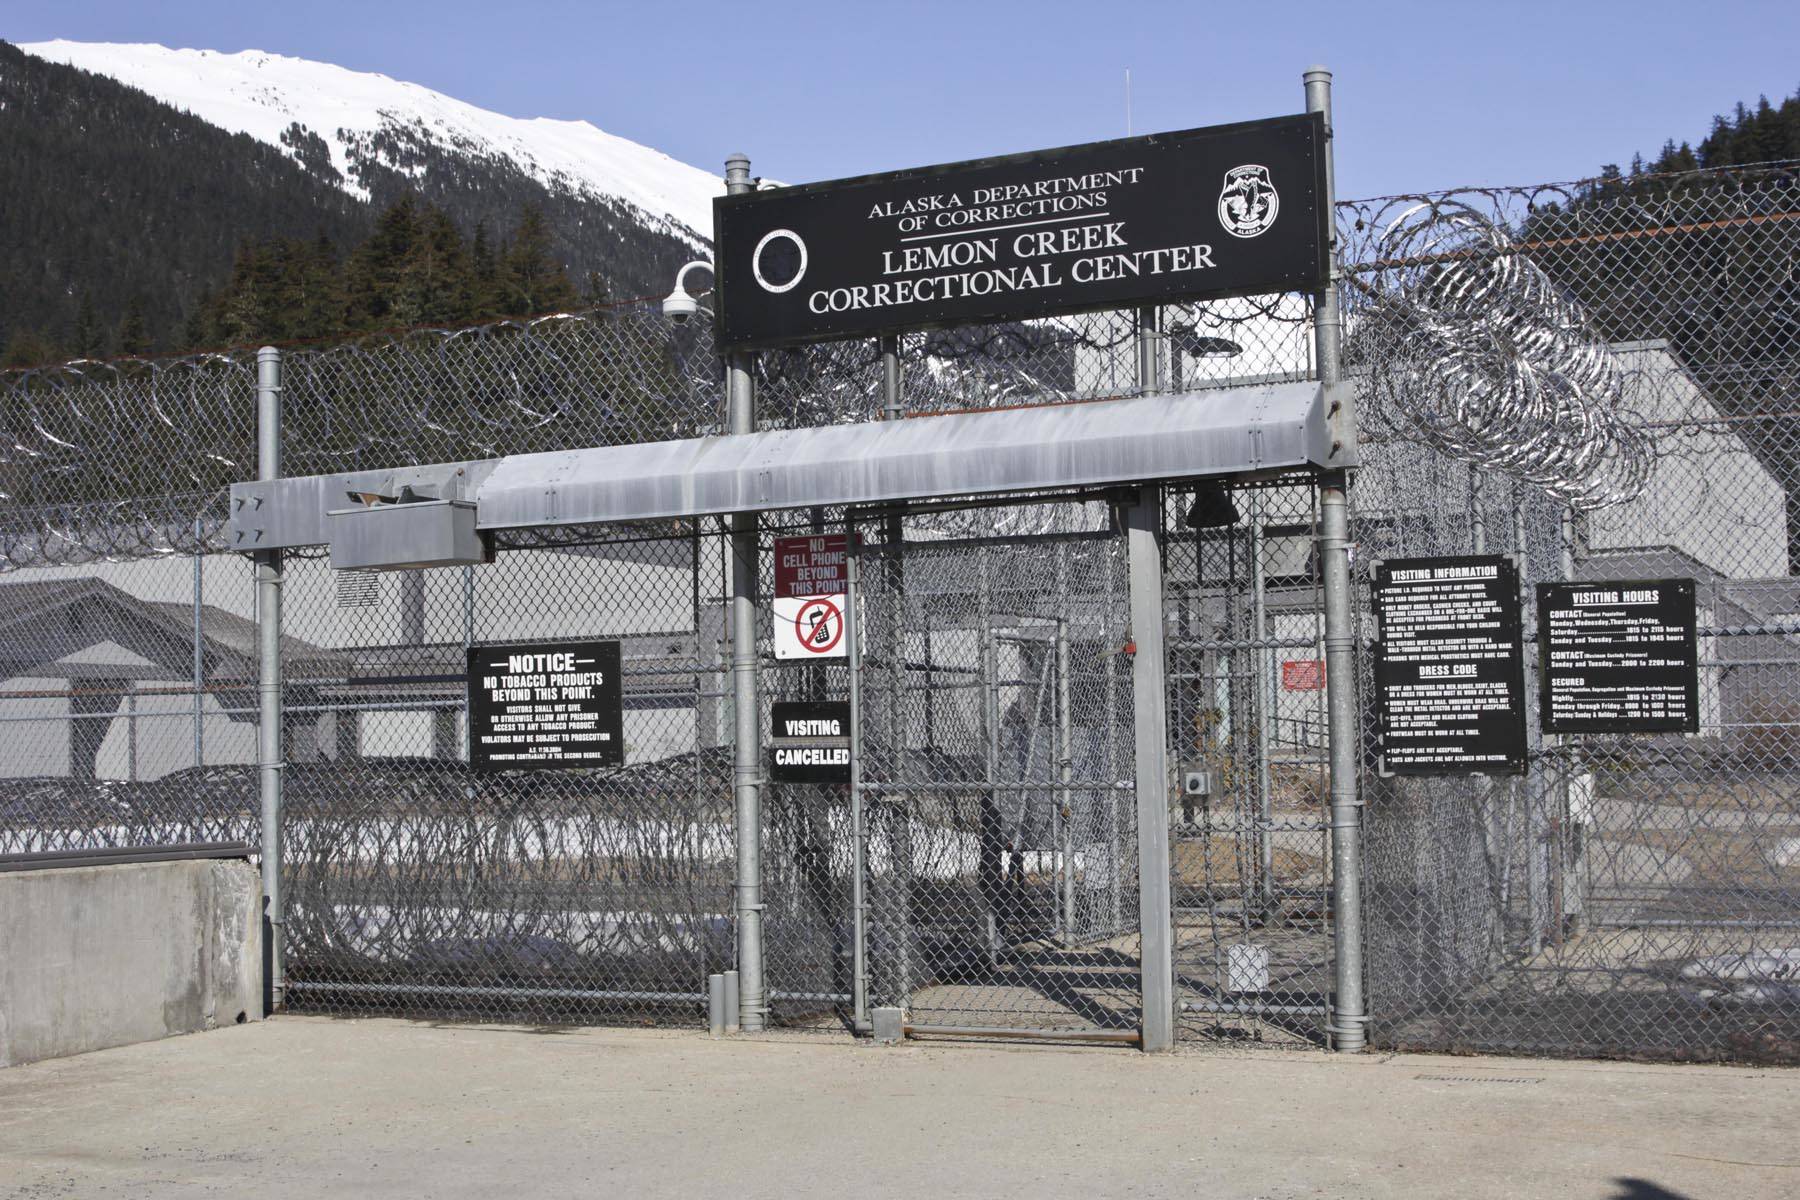 Lemon Creek Correctional Center had its first confirmed case of the coronavirus on April 10, 2020. There are now 11 staff members and 5 of their family members with confirmed cases. (Michael S. Lockett | Juneau Empire)